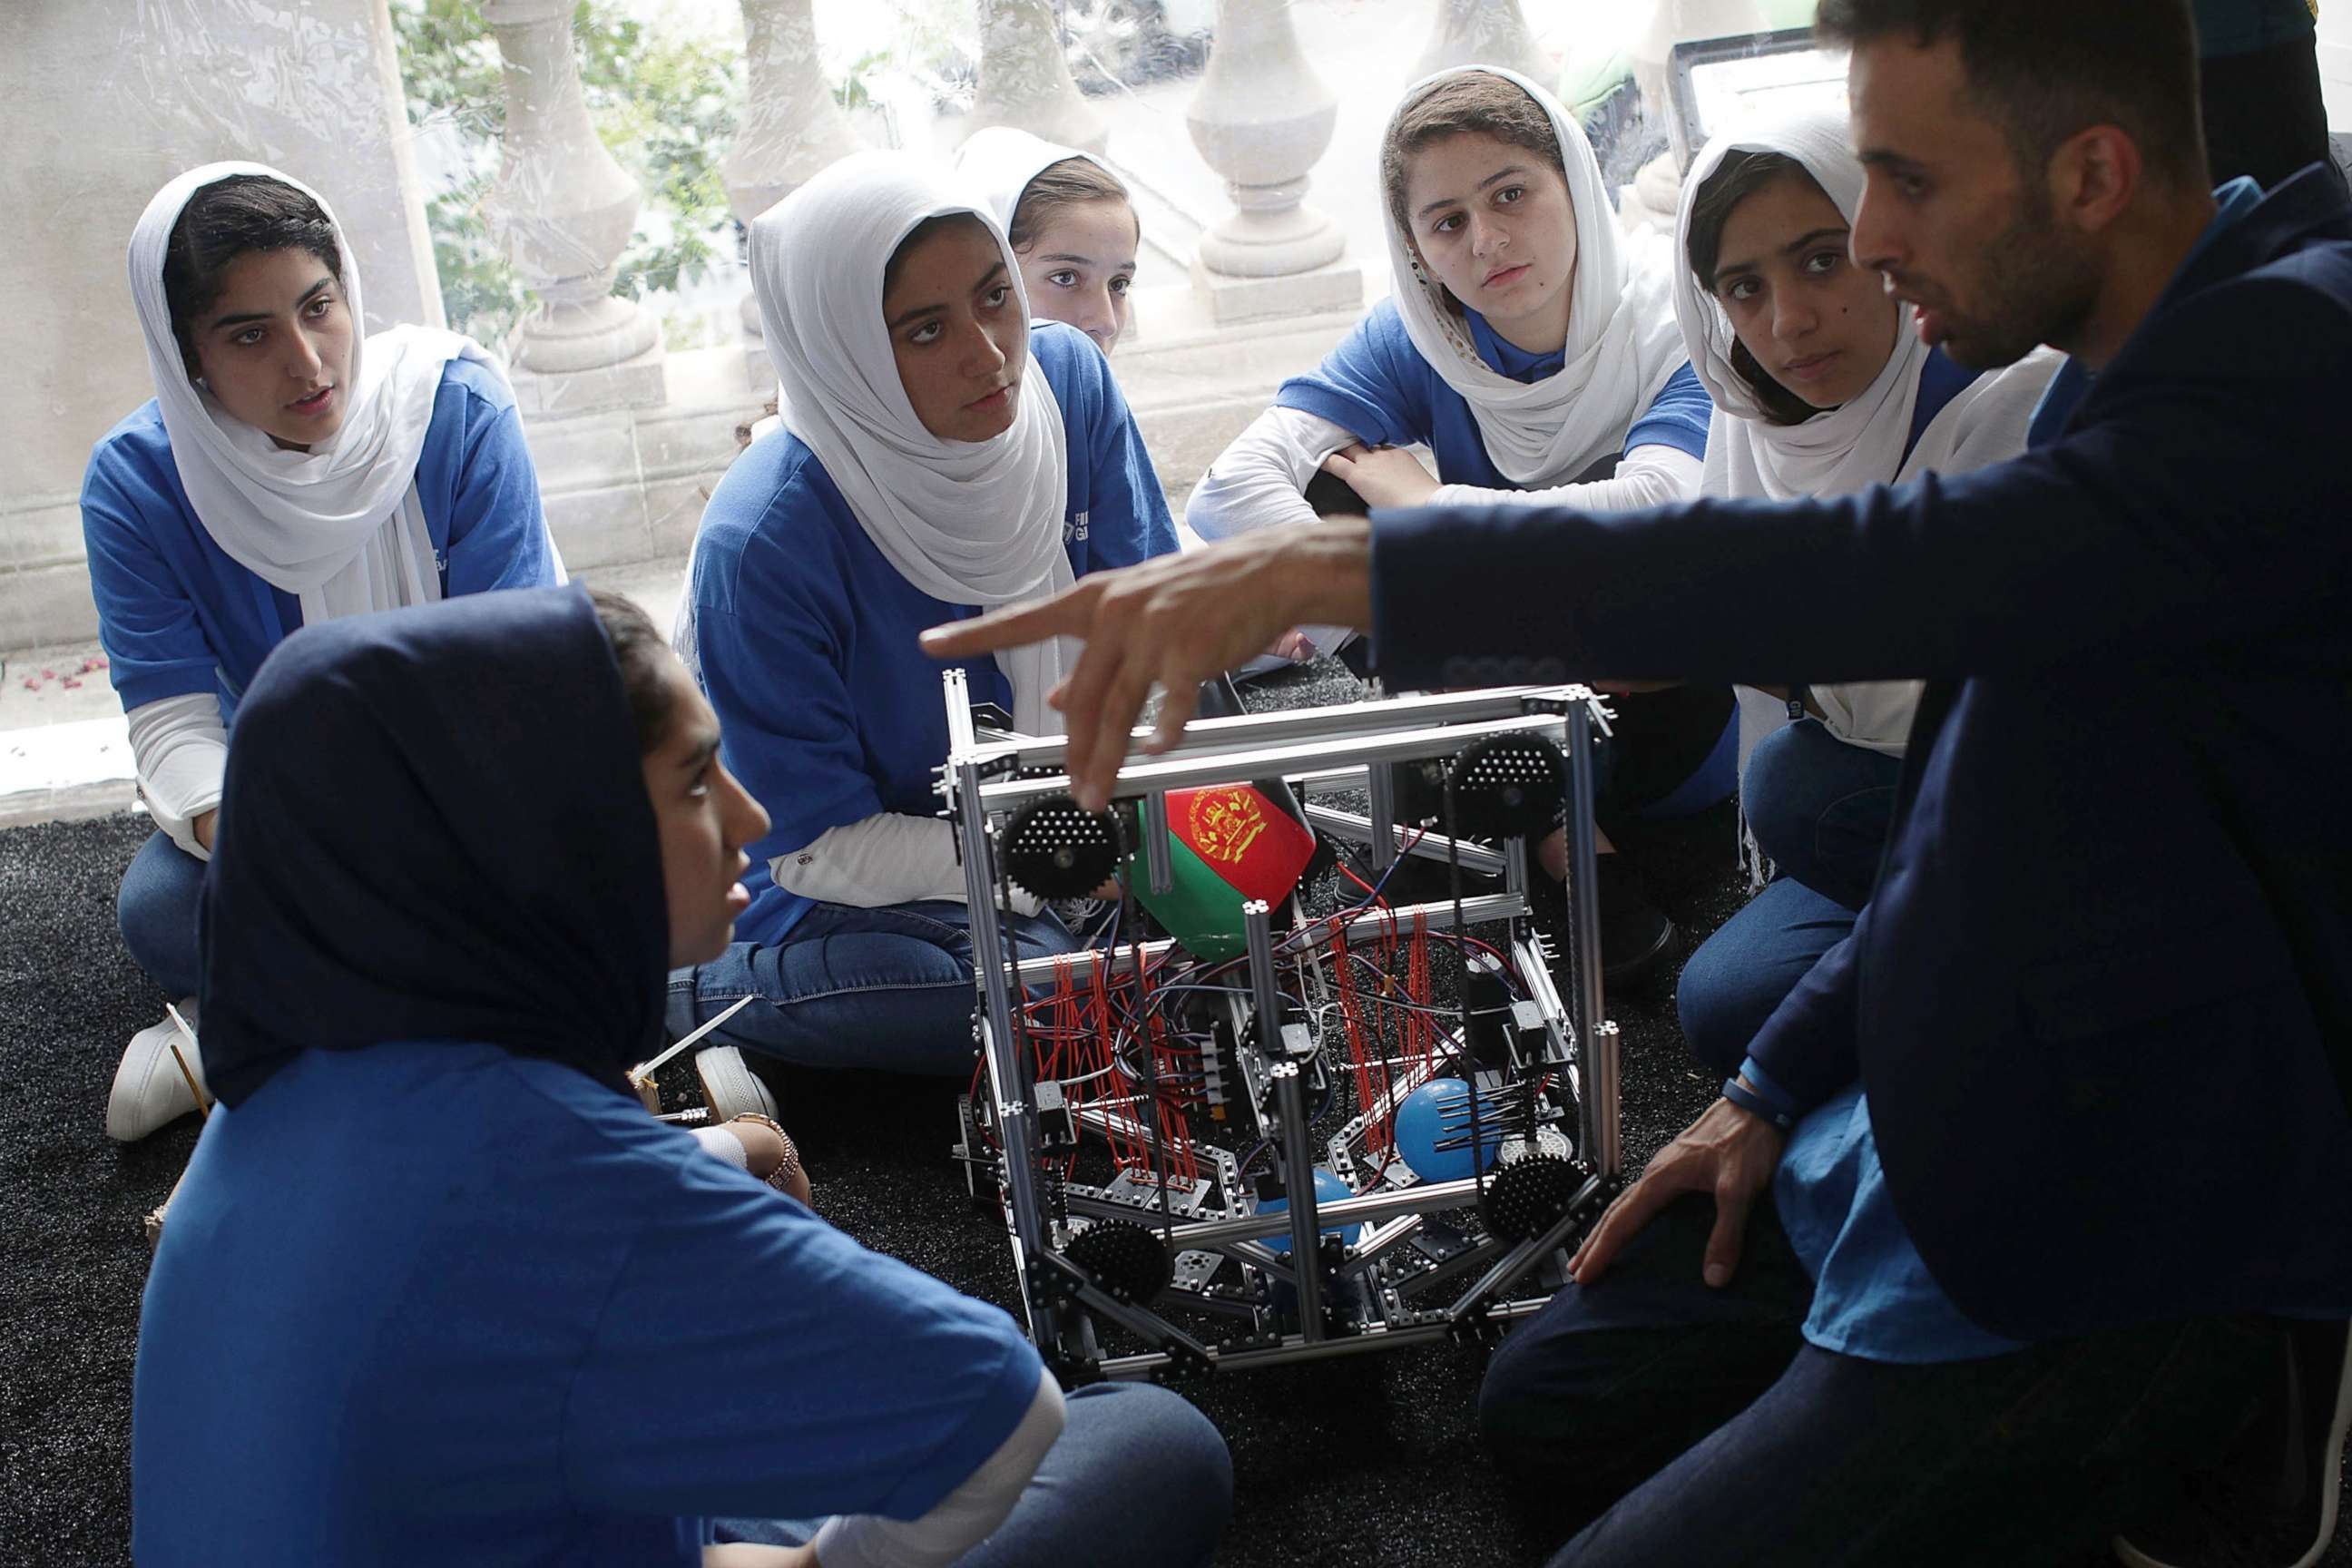 PHOTO: Team Afghanistan listen to coach Alireza Mehraban during the first of two days of the First Global International Robot Olympics, an international robotic challenge, July 17, 2017 at DAR Constitution Hall in Washington, D.C.